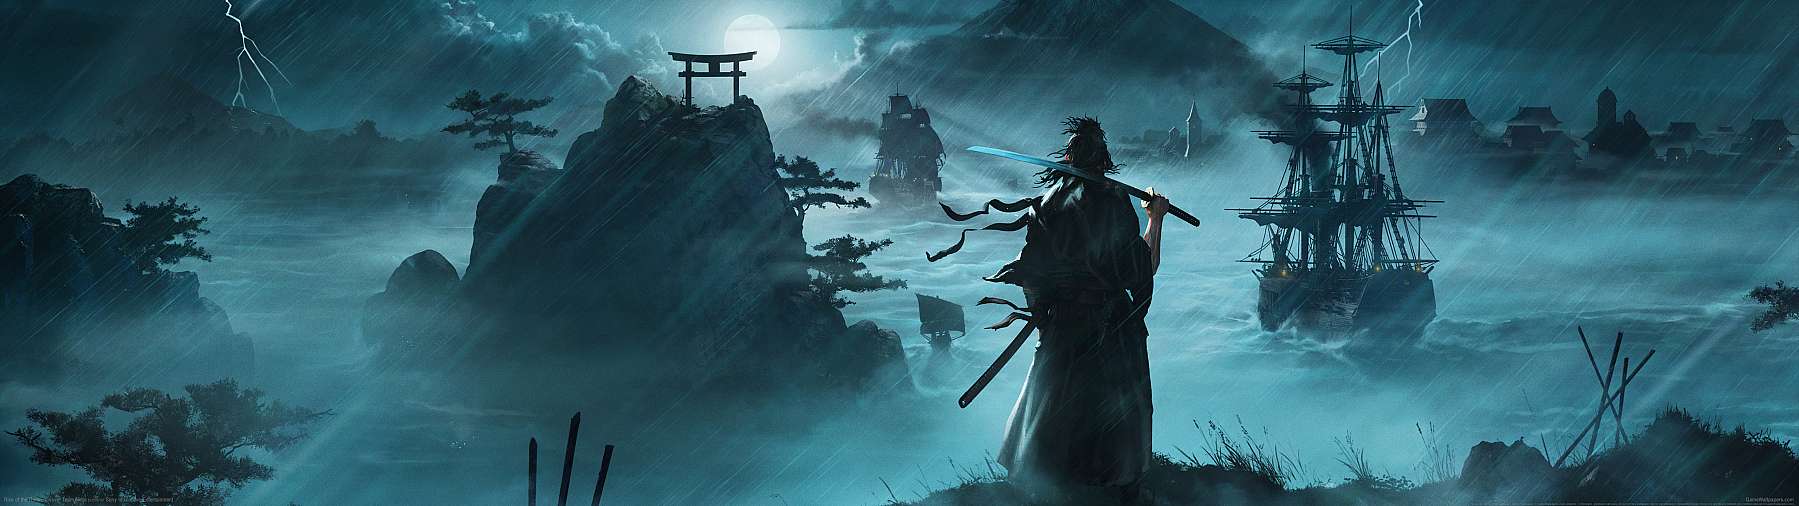 Rise of the Ronin achtergrond